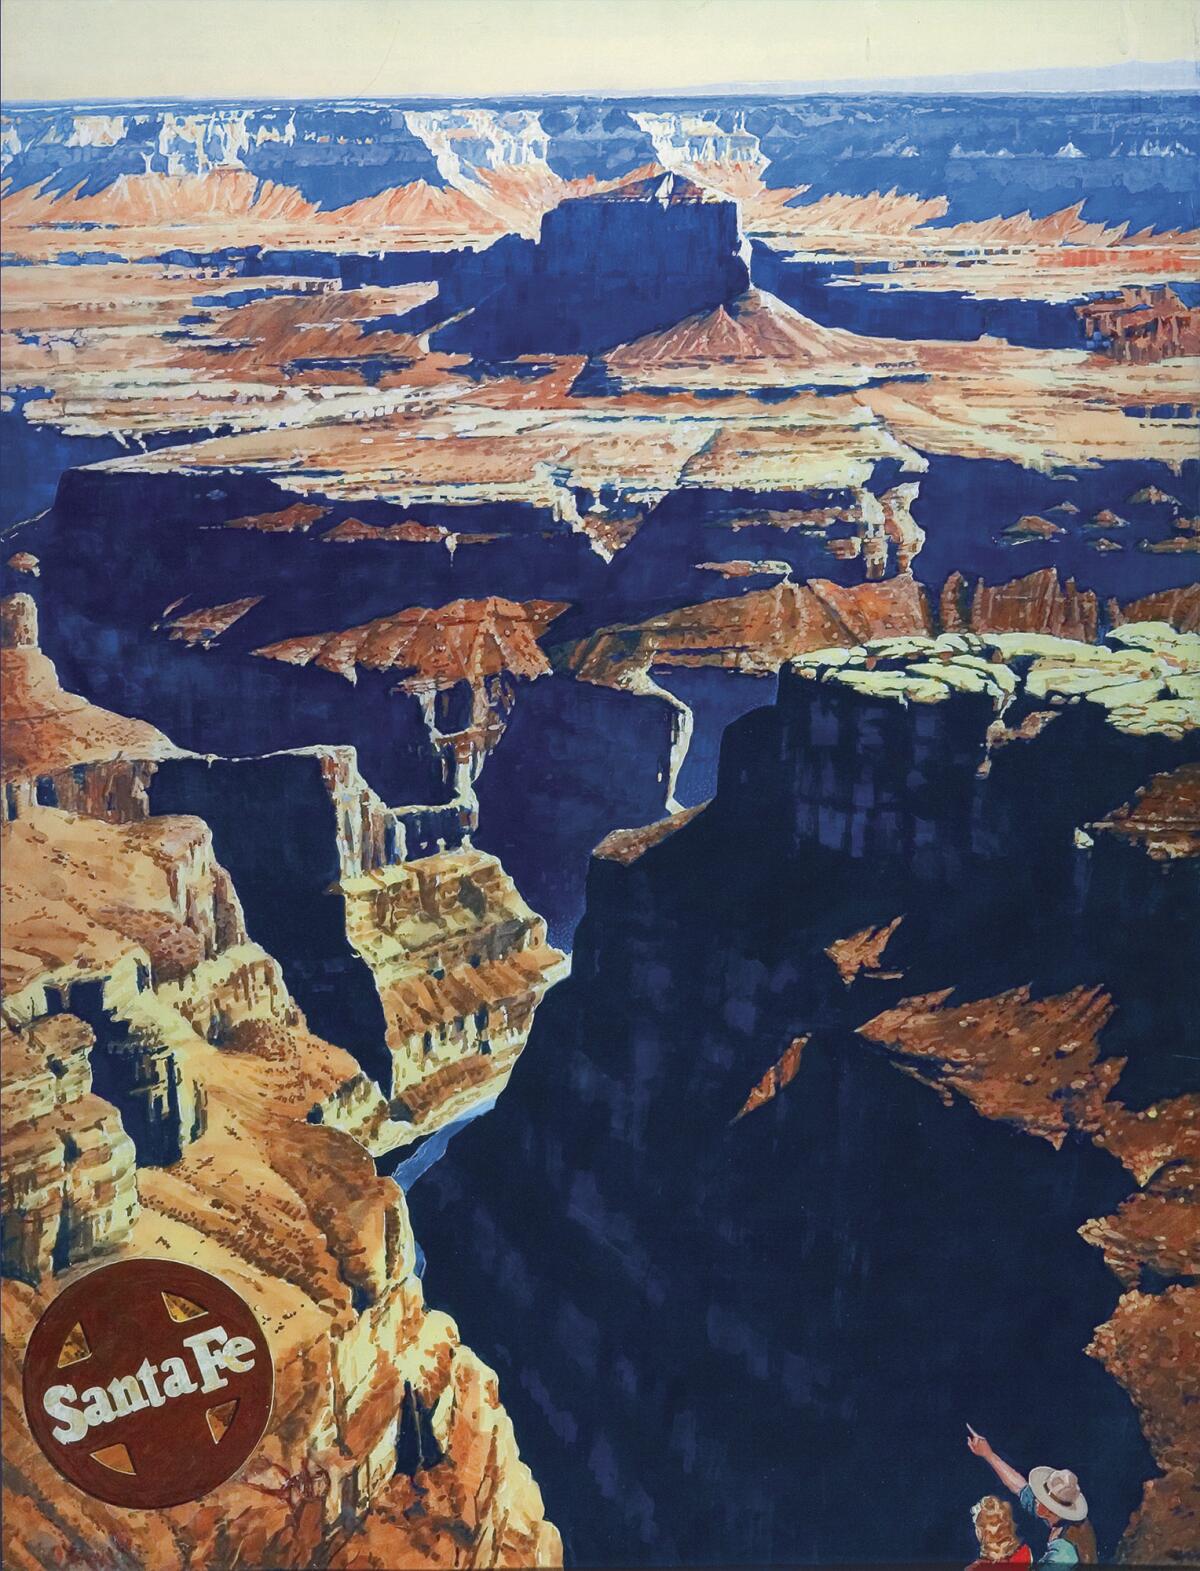 "Grand Canyon, Commercial Advertising for the Atchison, Topeka, and Santa Fe Railway Company," c. 1930.